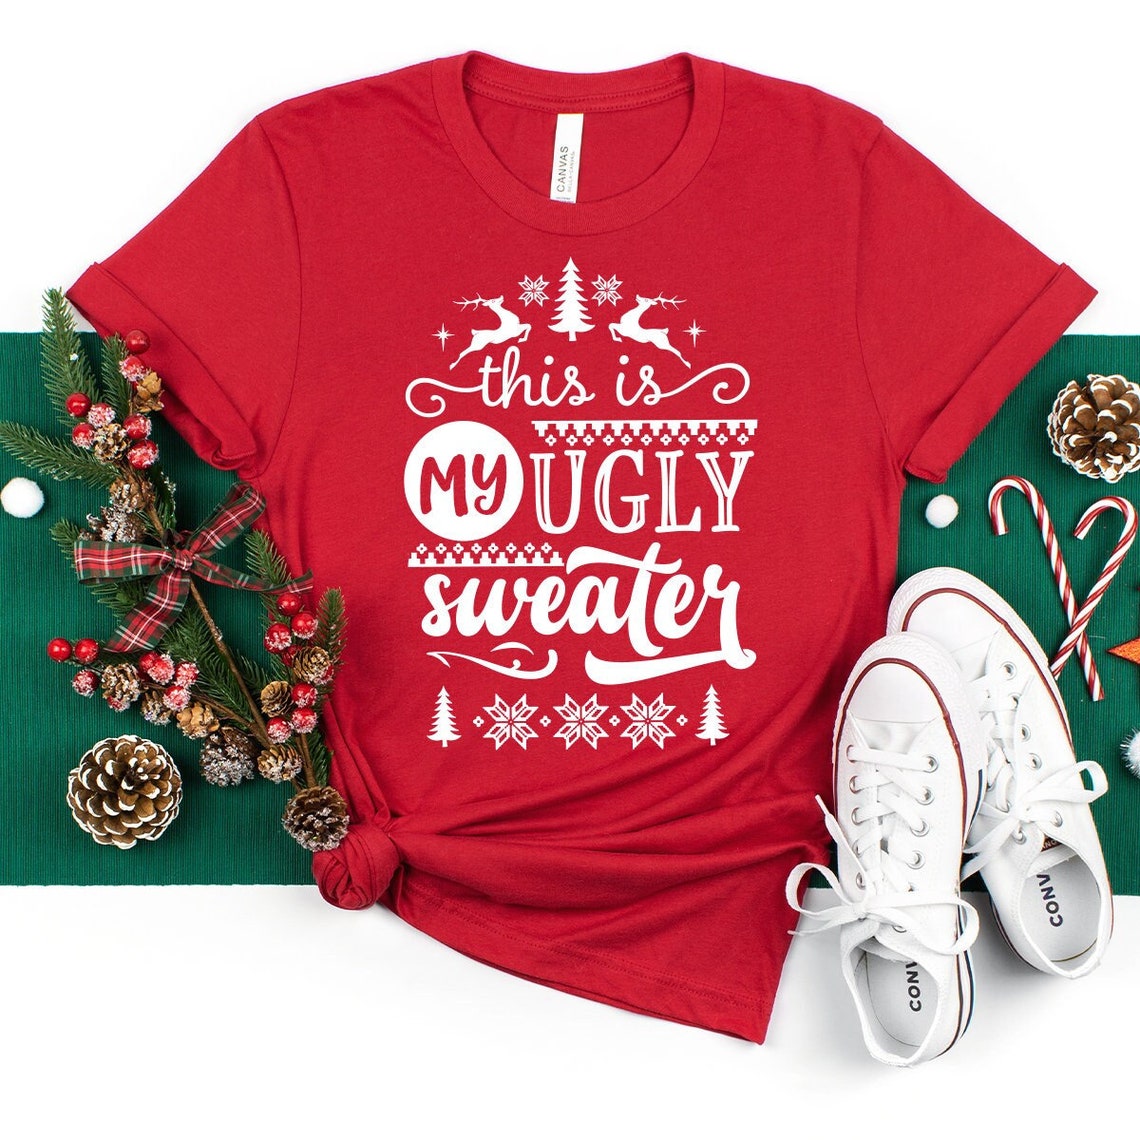 This Is My Ugly Sweaters Shirt Christmas Holiday Shirt